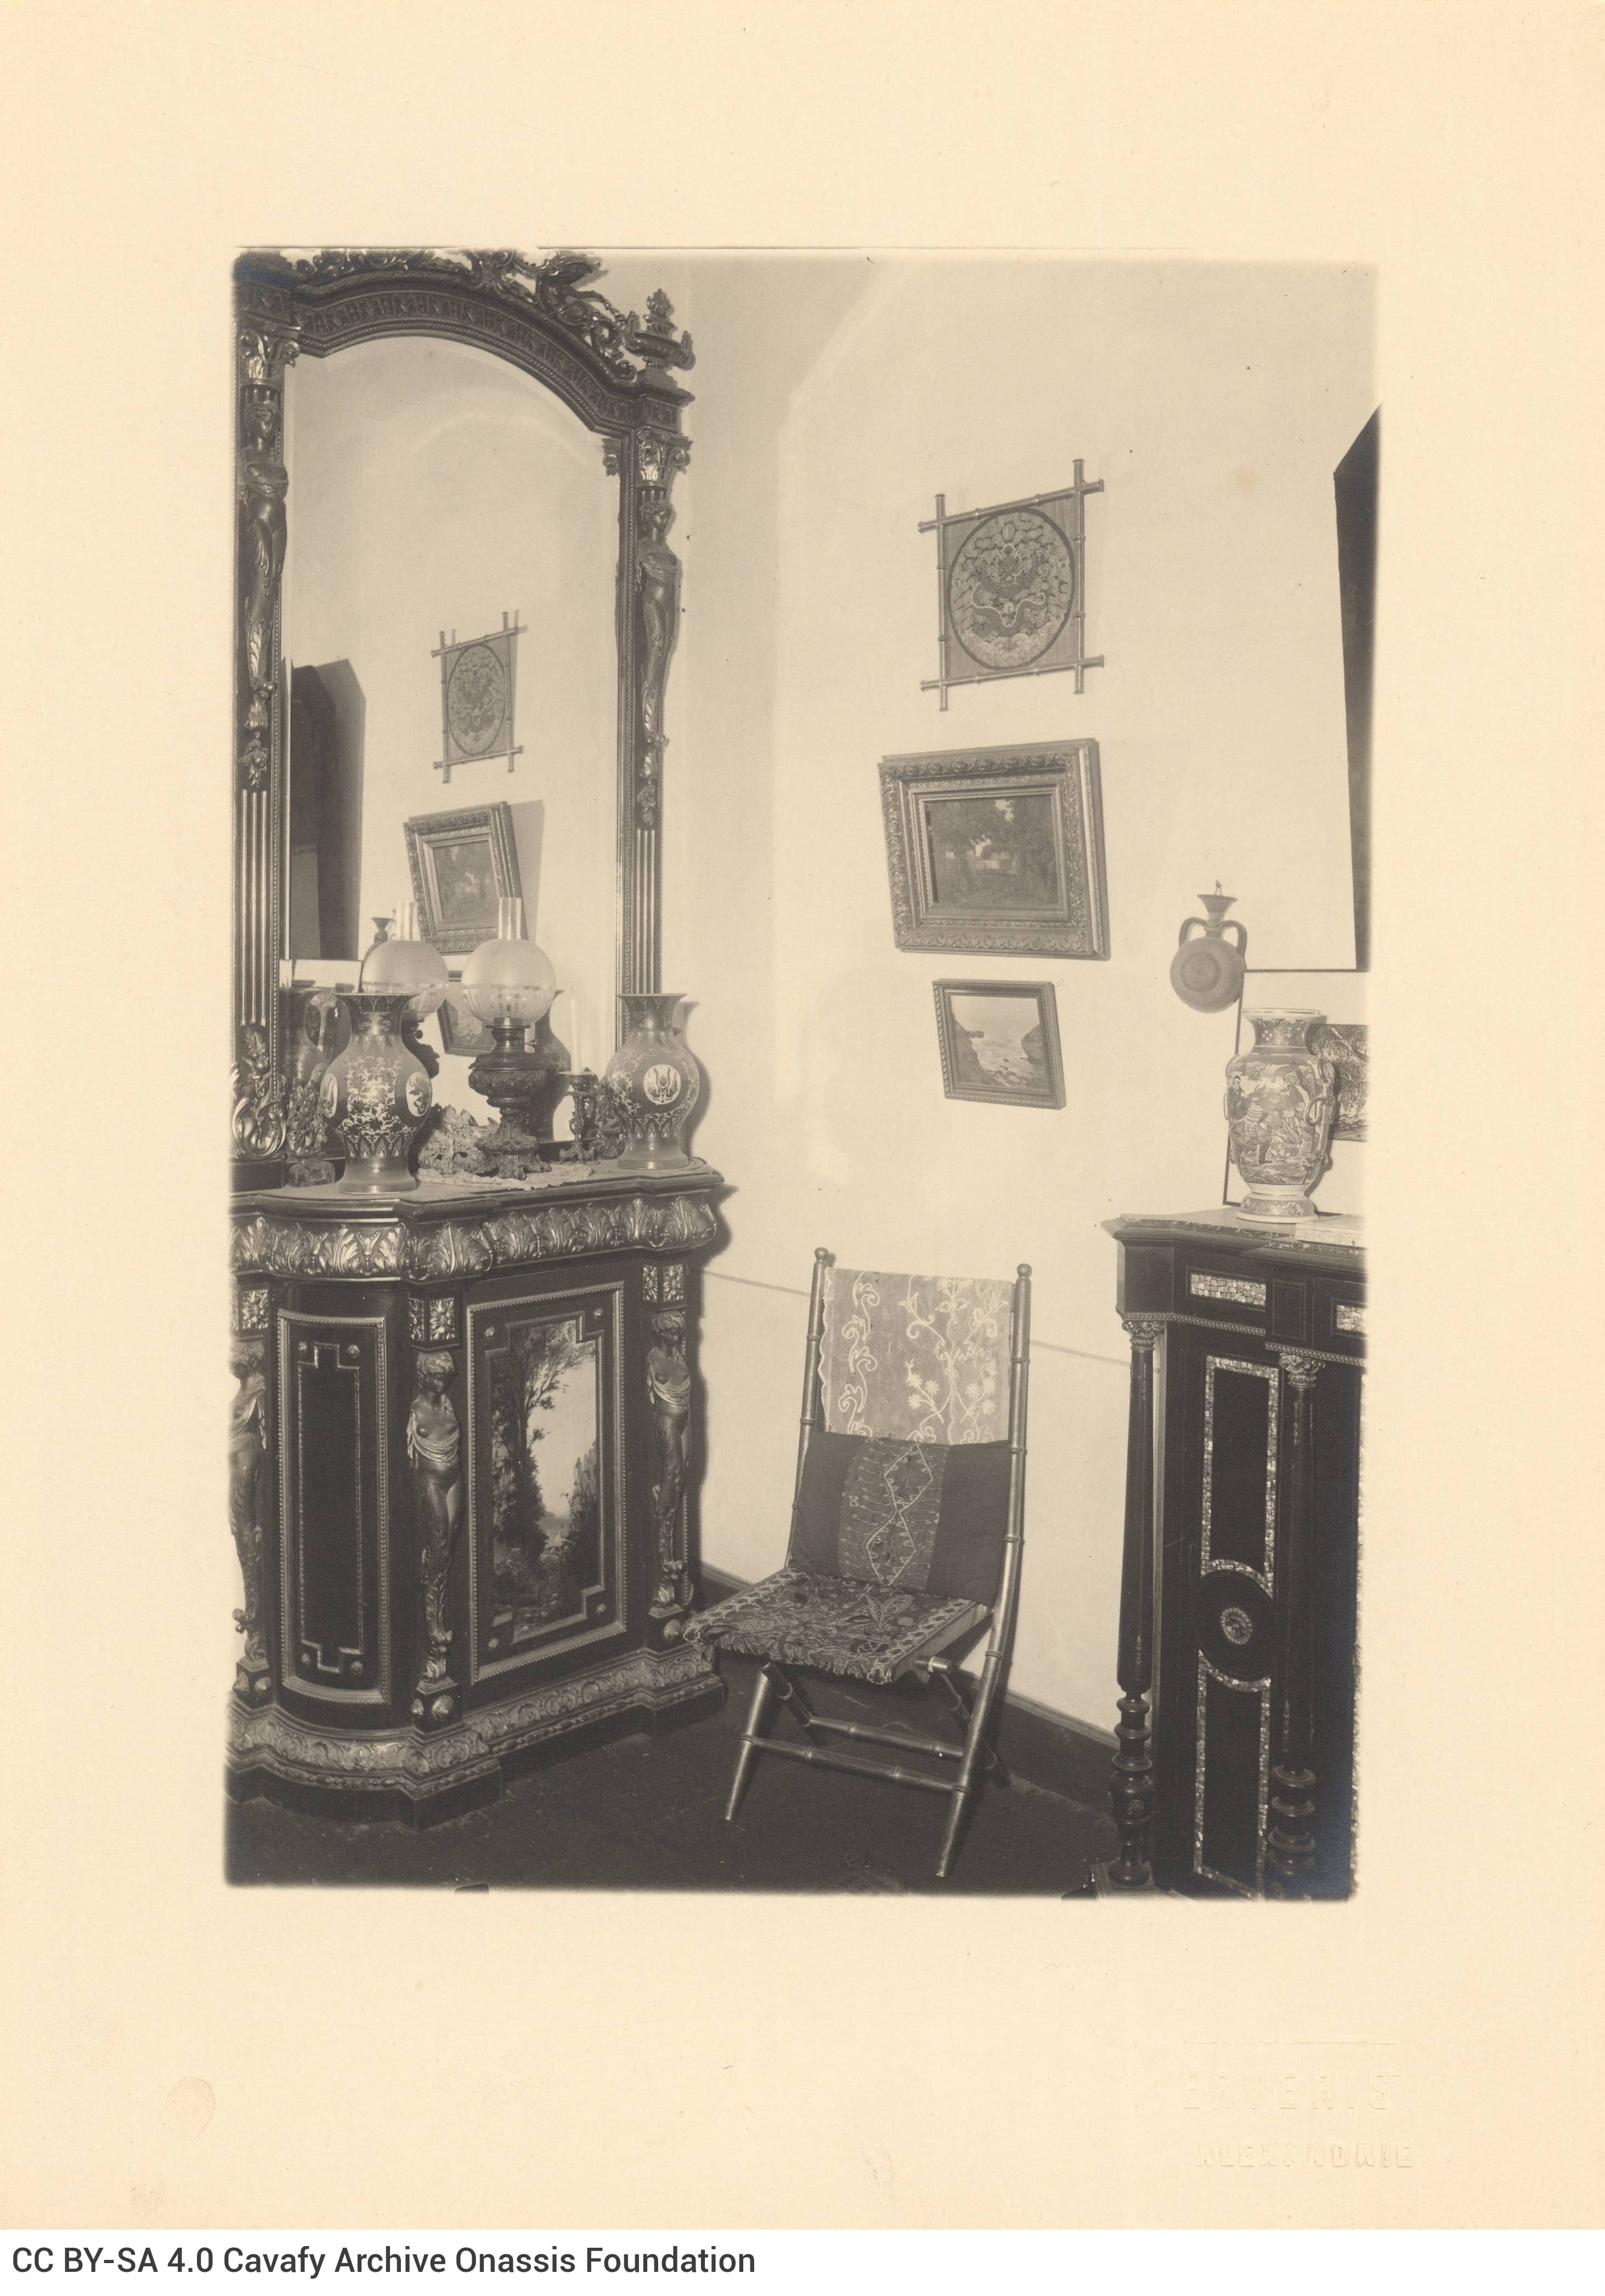 Photograph of the interior of Cavafy's flat. View of the living room, with a console table and a mirror, a seat and frames on